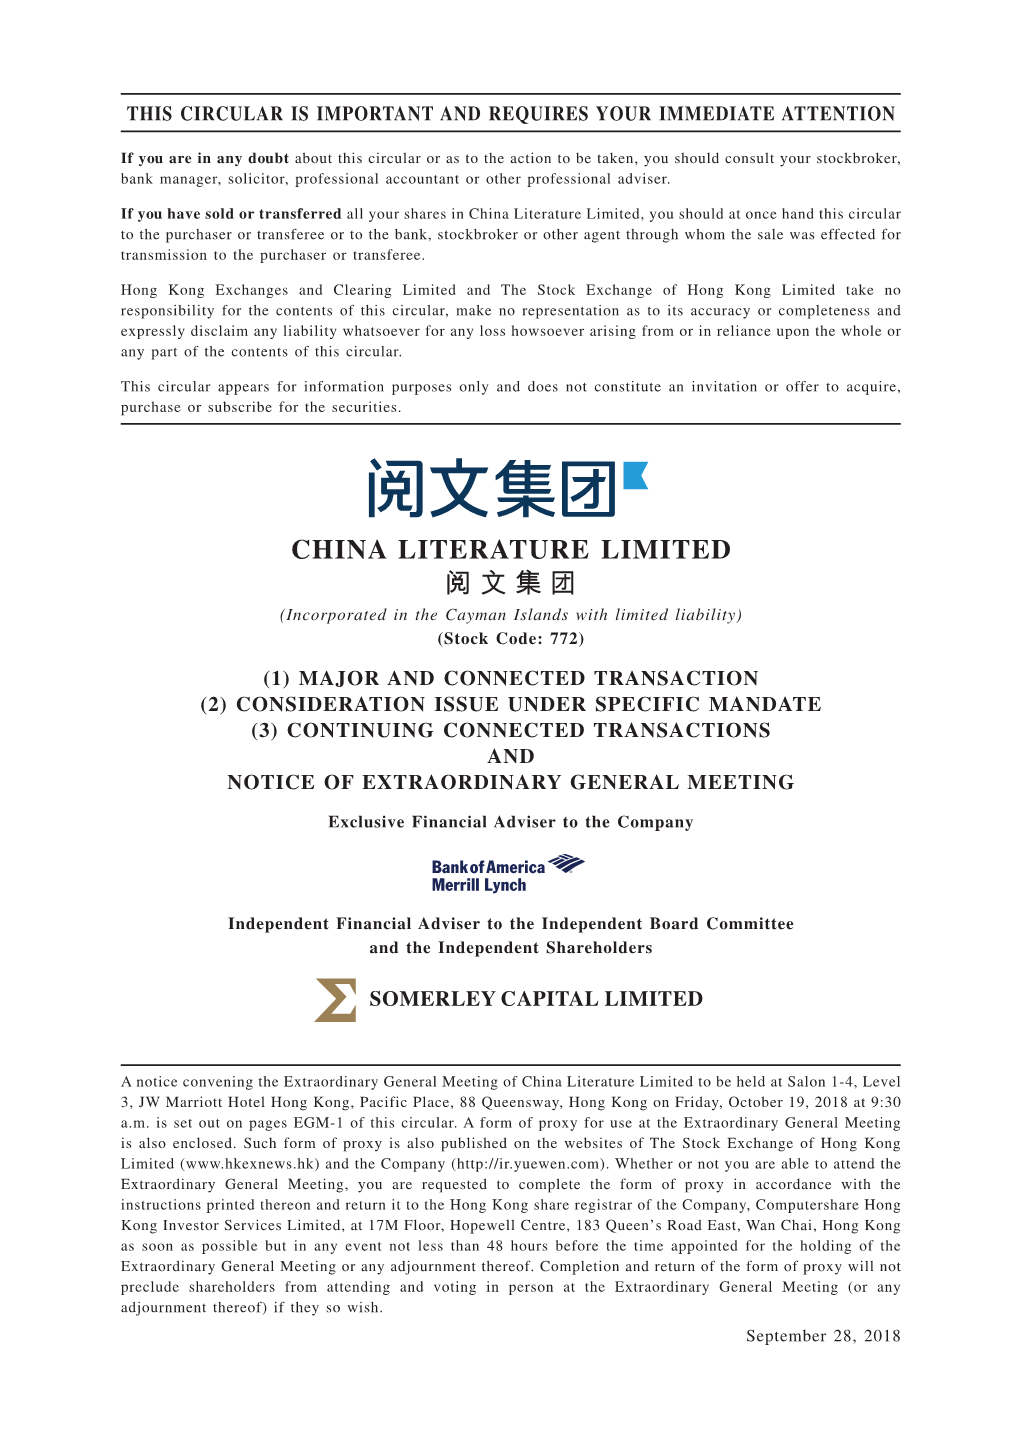 CHINA LITERATURE LIMITED 閱文集團 (Incorporated in the Cayman Islands with Limited Liability) (Stock Code: 772)